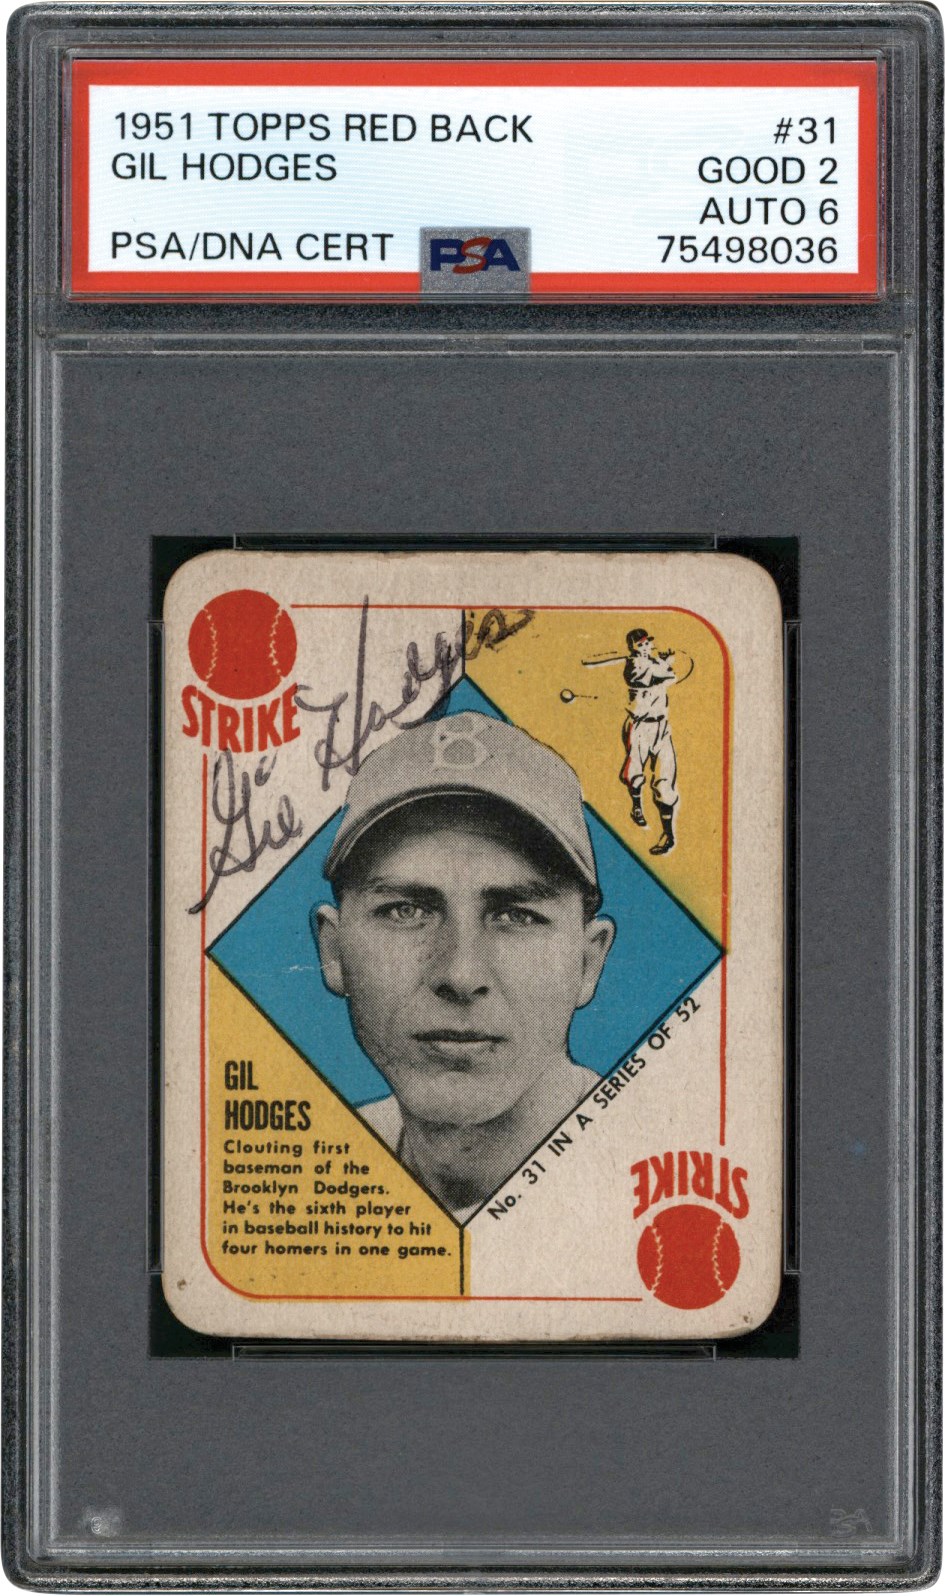 - Signed 1951 Topps Red Back Gil Hodges PSA GD 2 Auto 6 (Pop 1 of 1 Highest Graded)